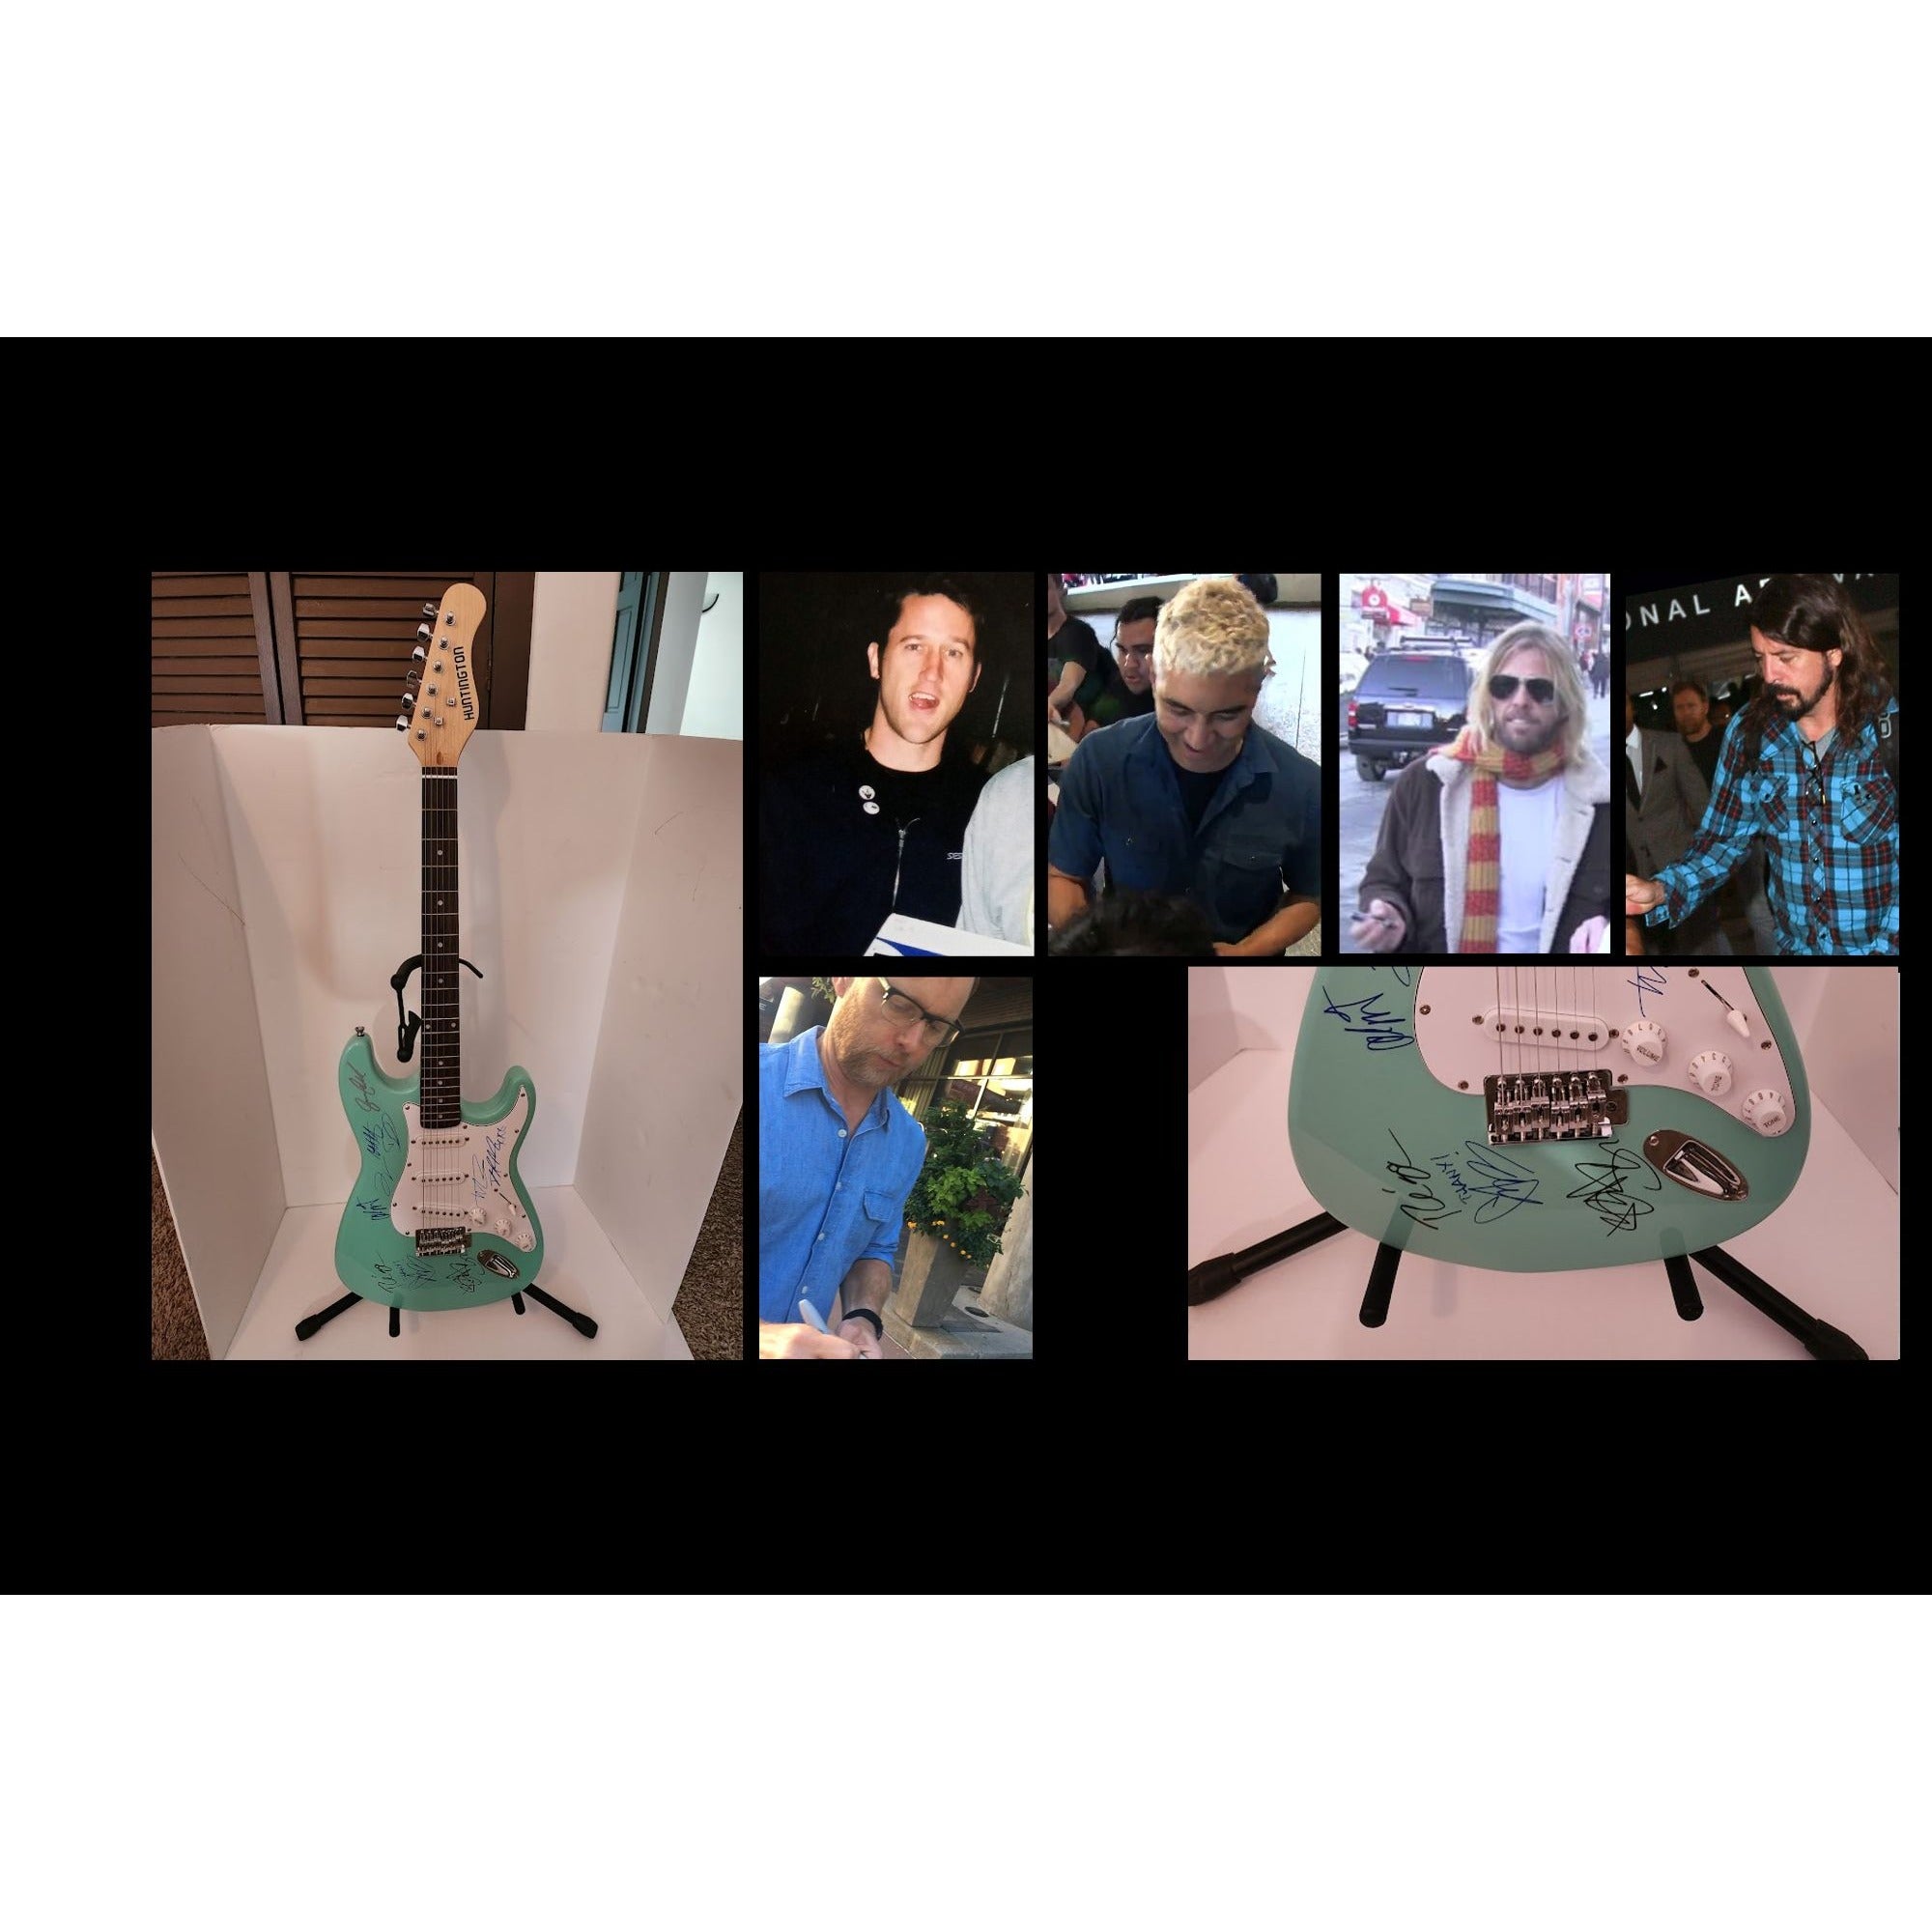 David Grohl, Billie Joe Armstrong, Chris Cornell, Jerry Cantrell signed guitar with proof